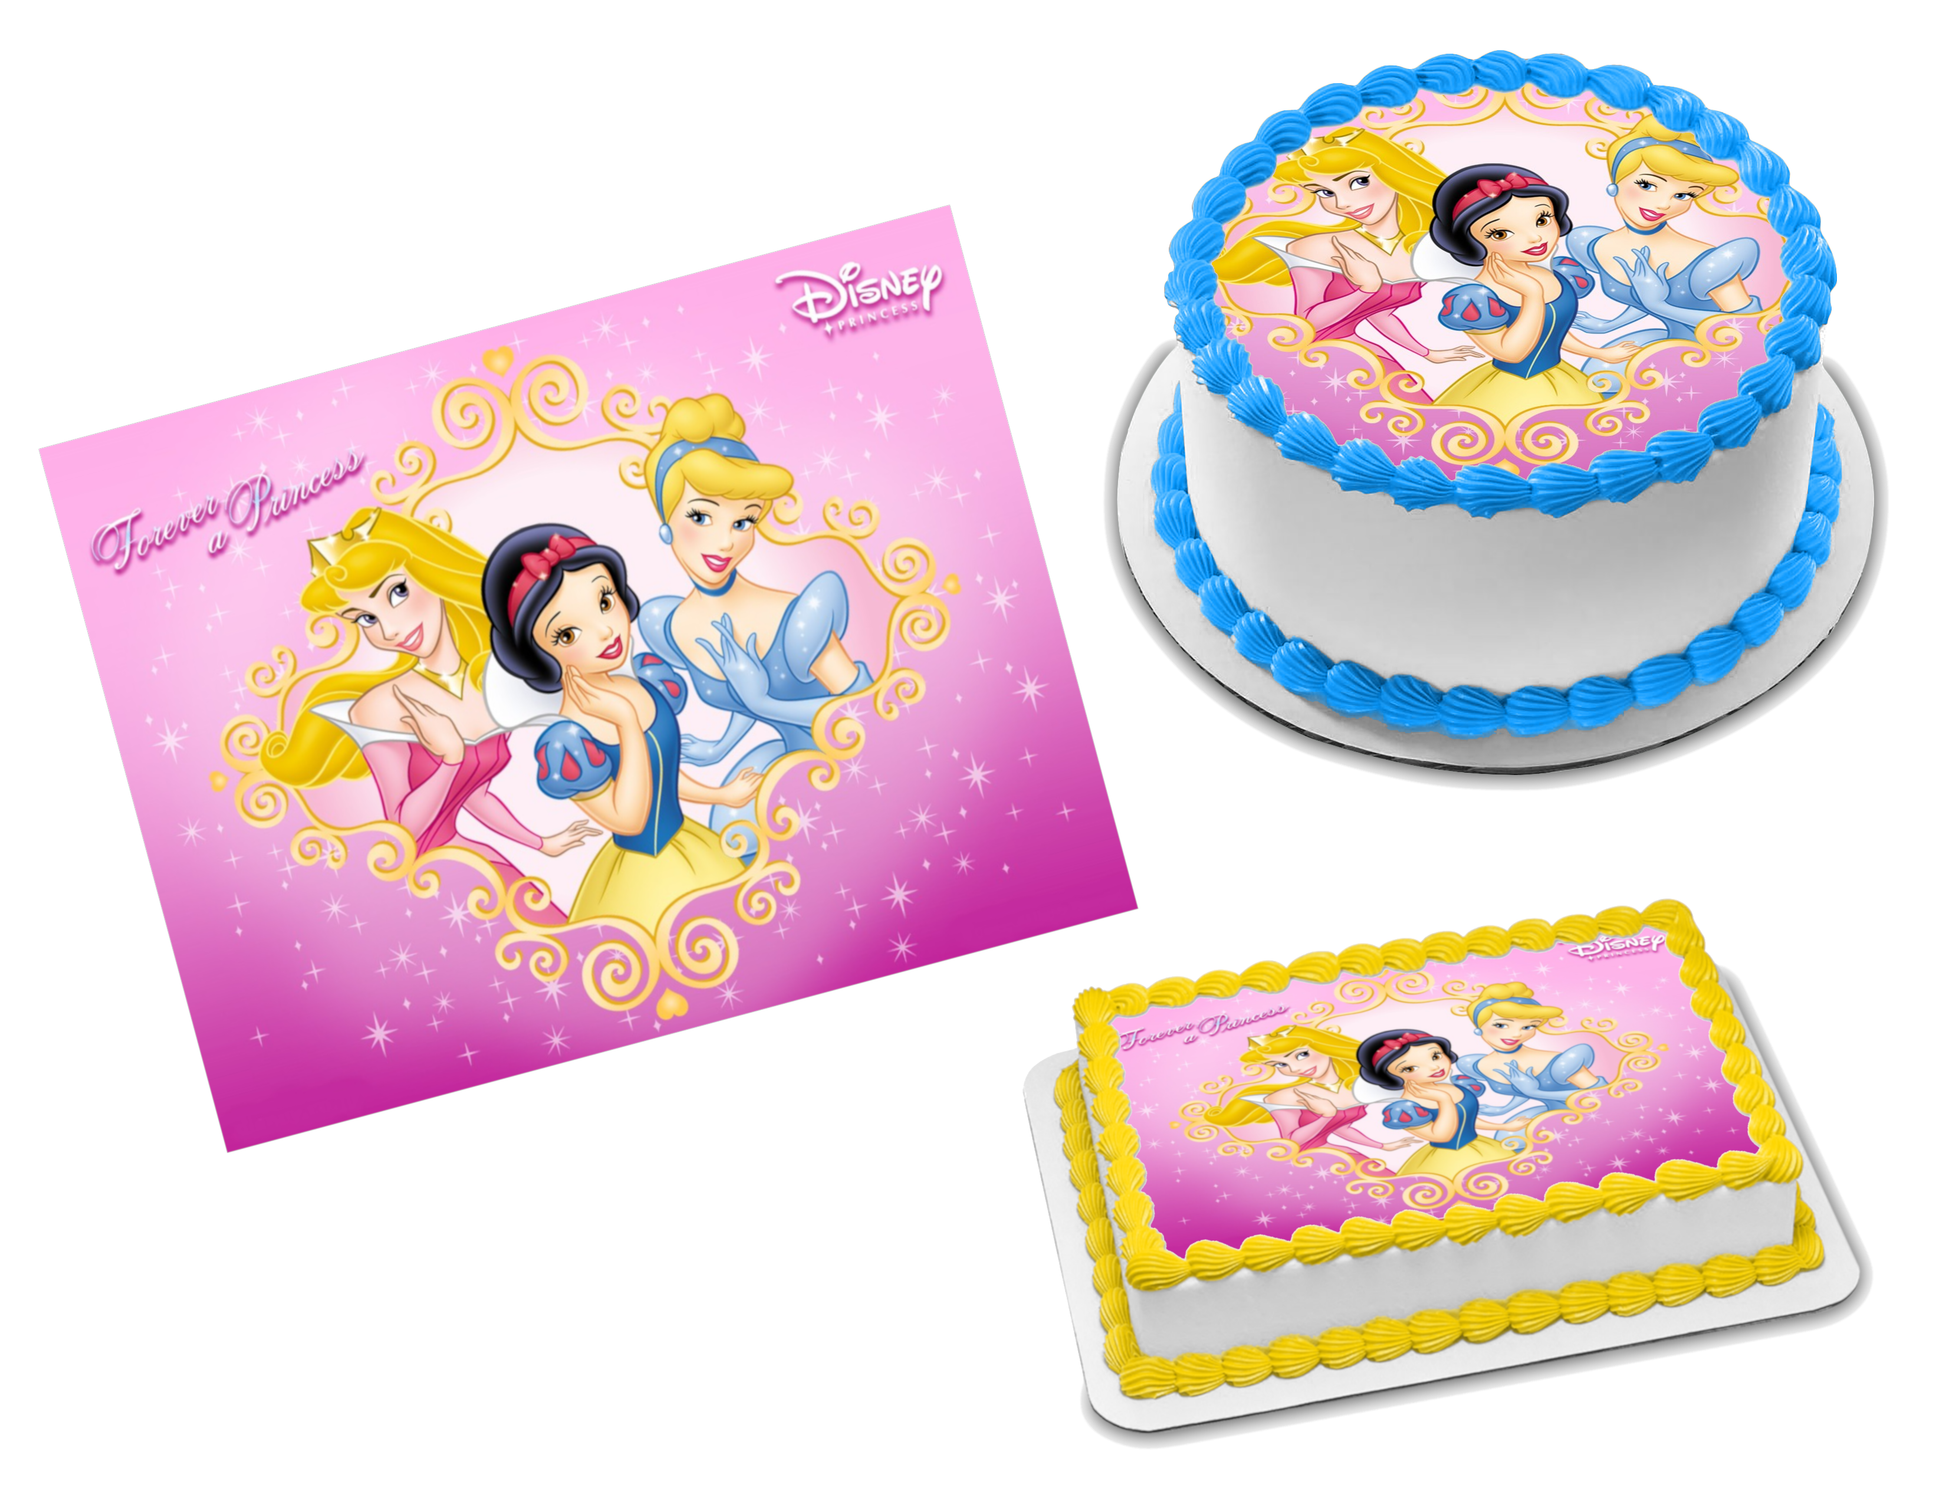 Disney Princess Edible Birthday Cake Topper With Your Personalised Message,  Edible Cake Images 